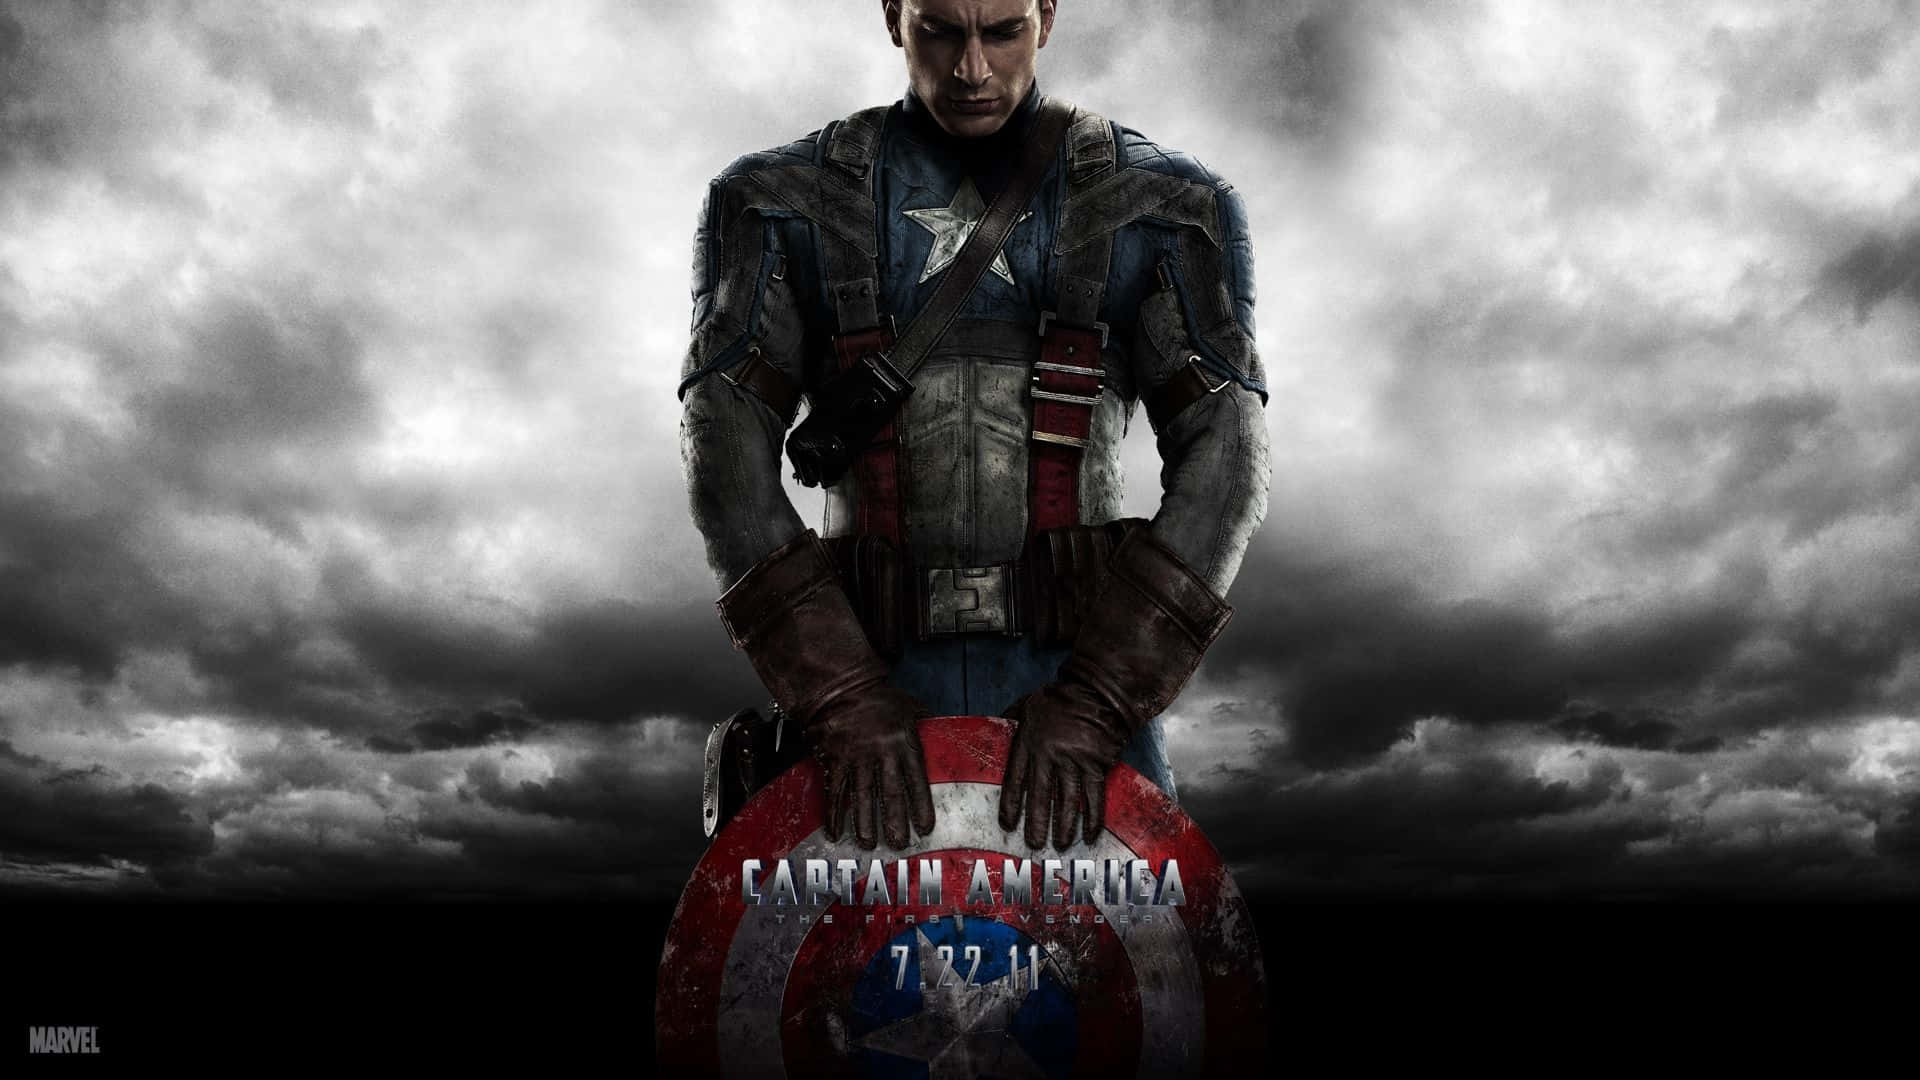 "Be the Best of the Best - Captain America"